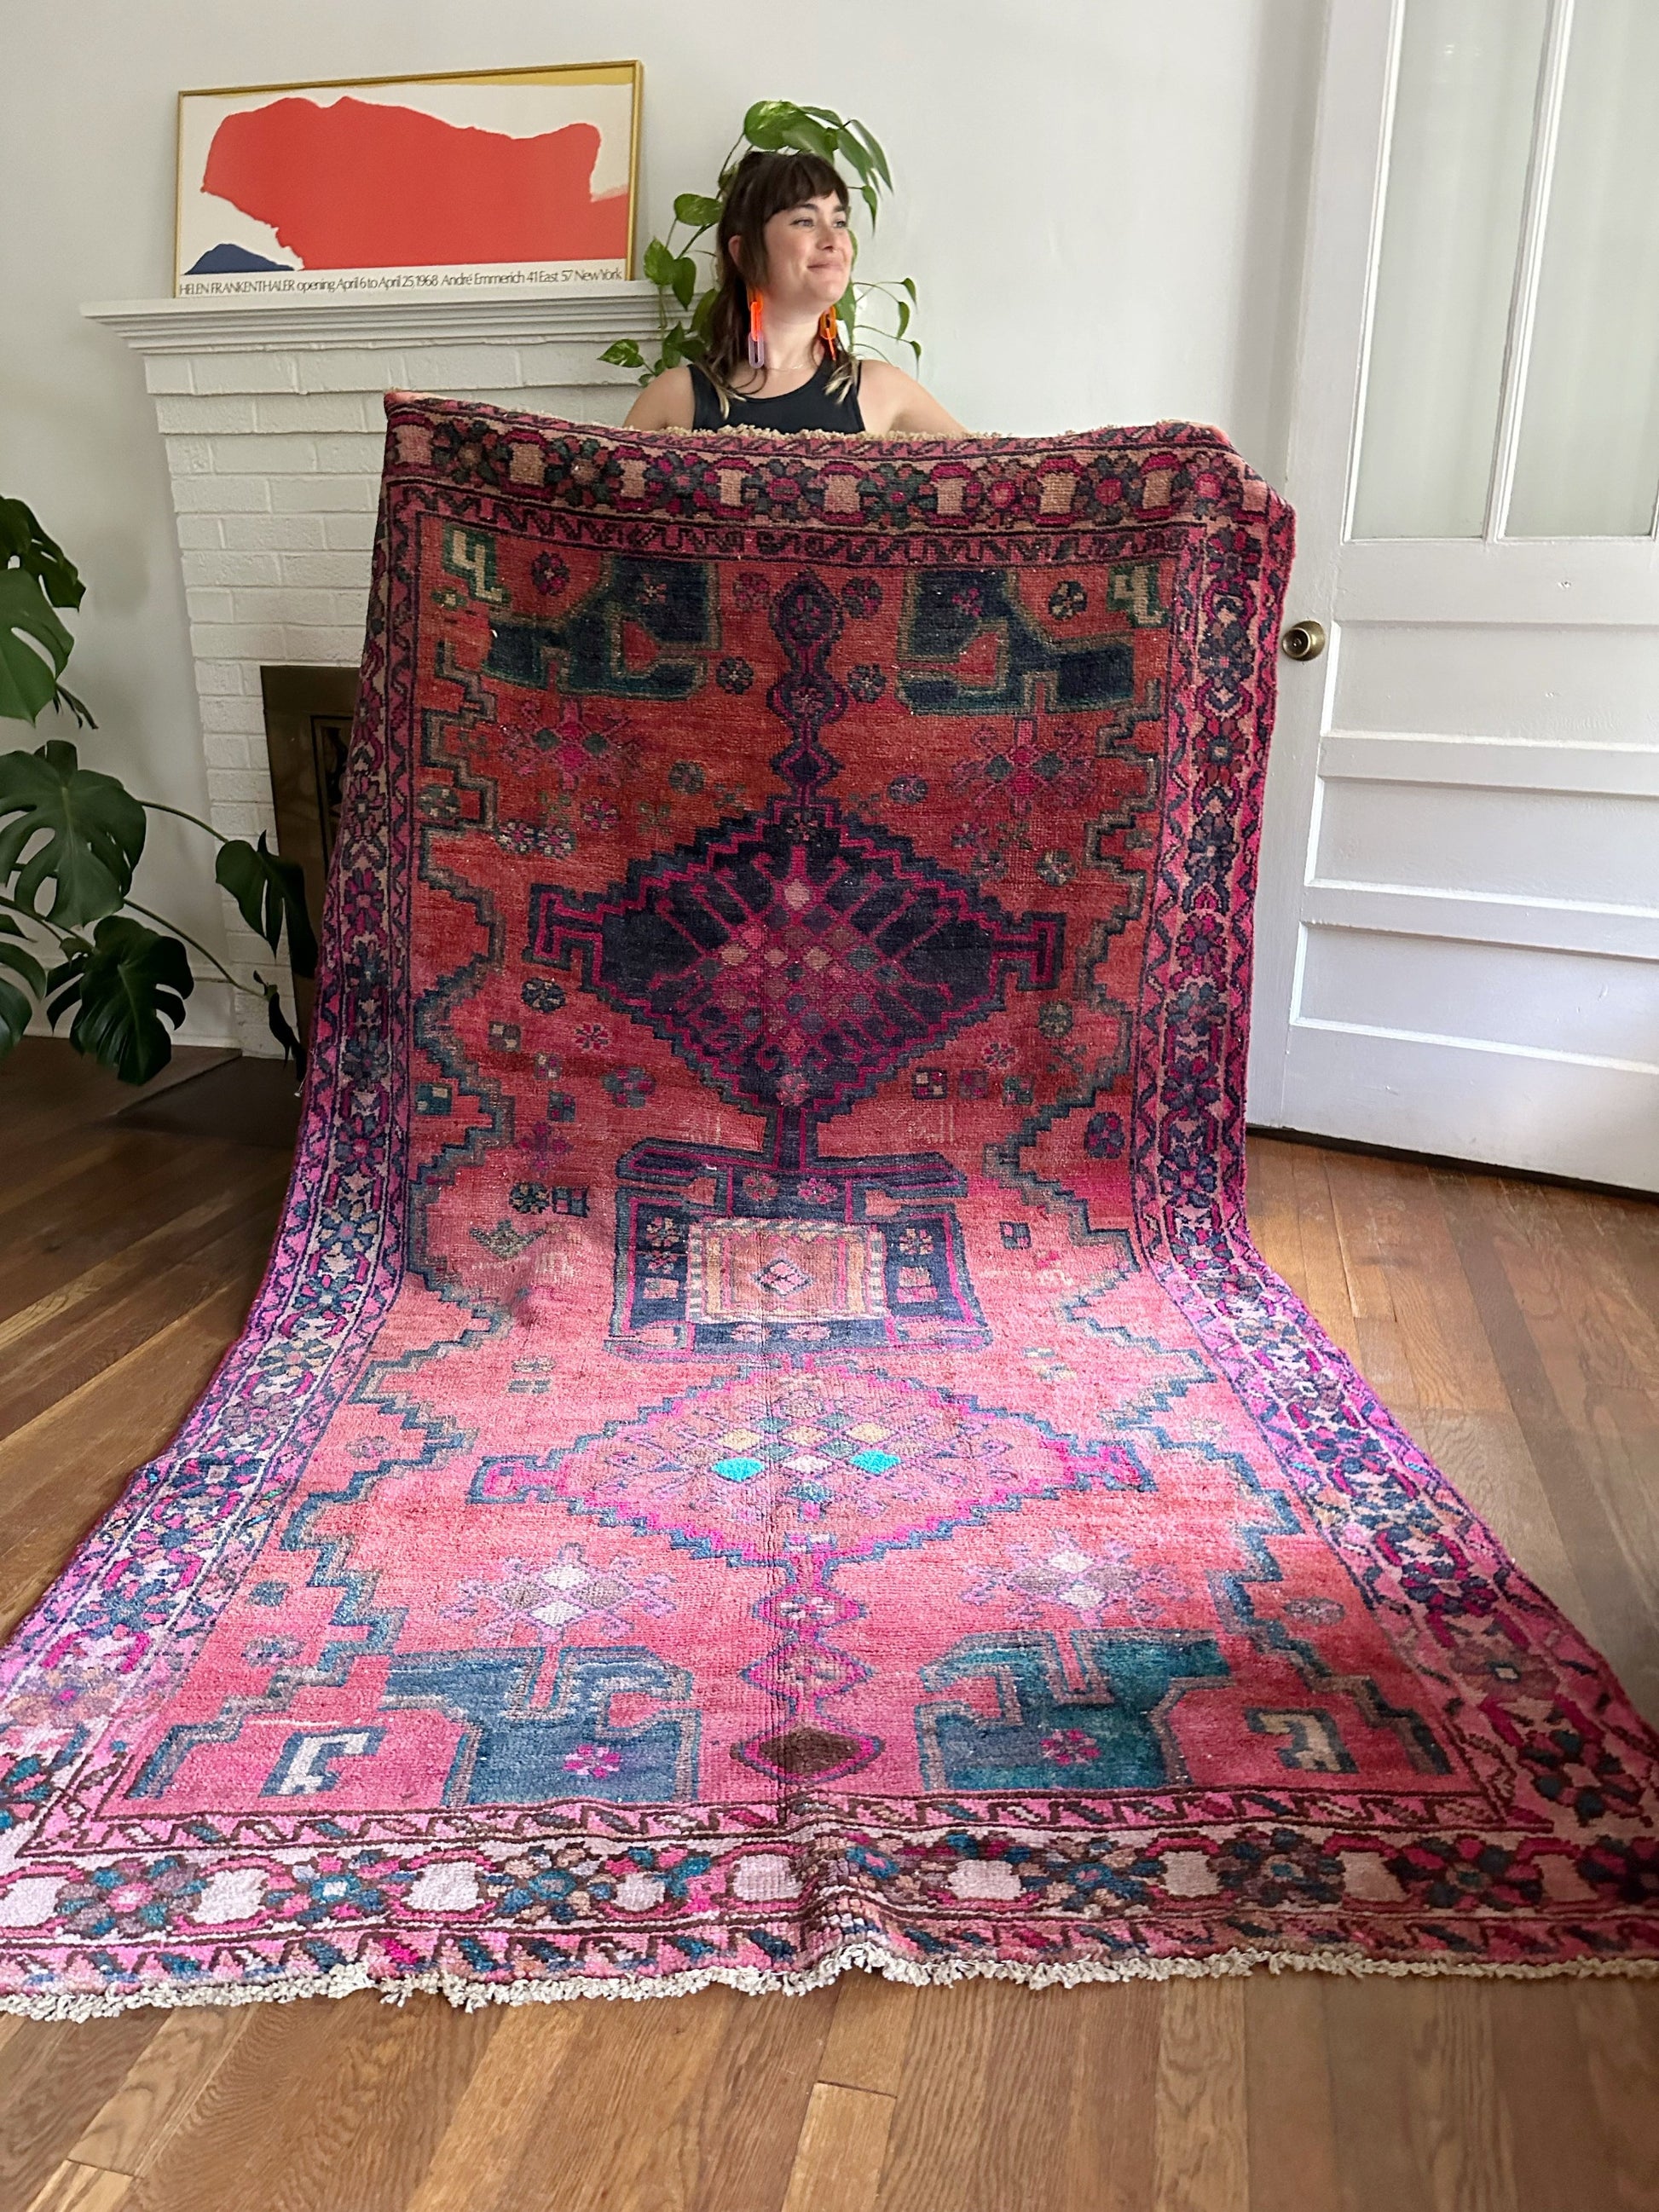 Holding picture of Oak Persian rug shows how gorgeous it is in the light